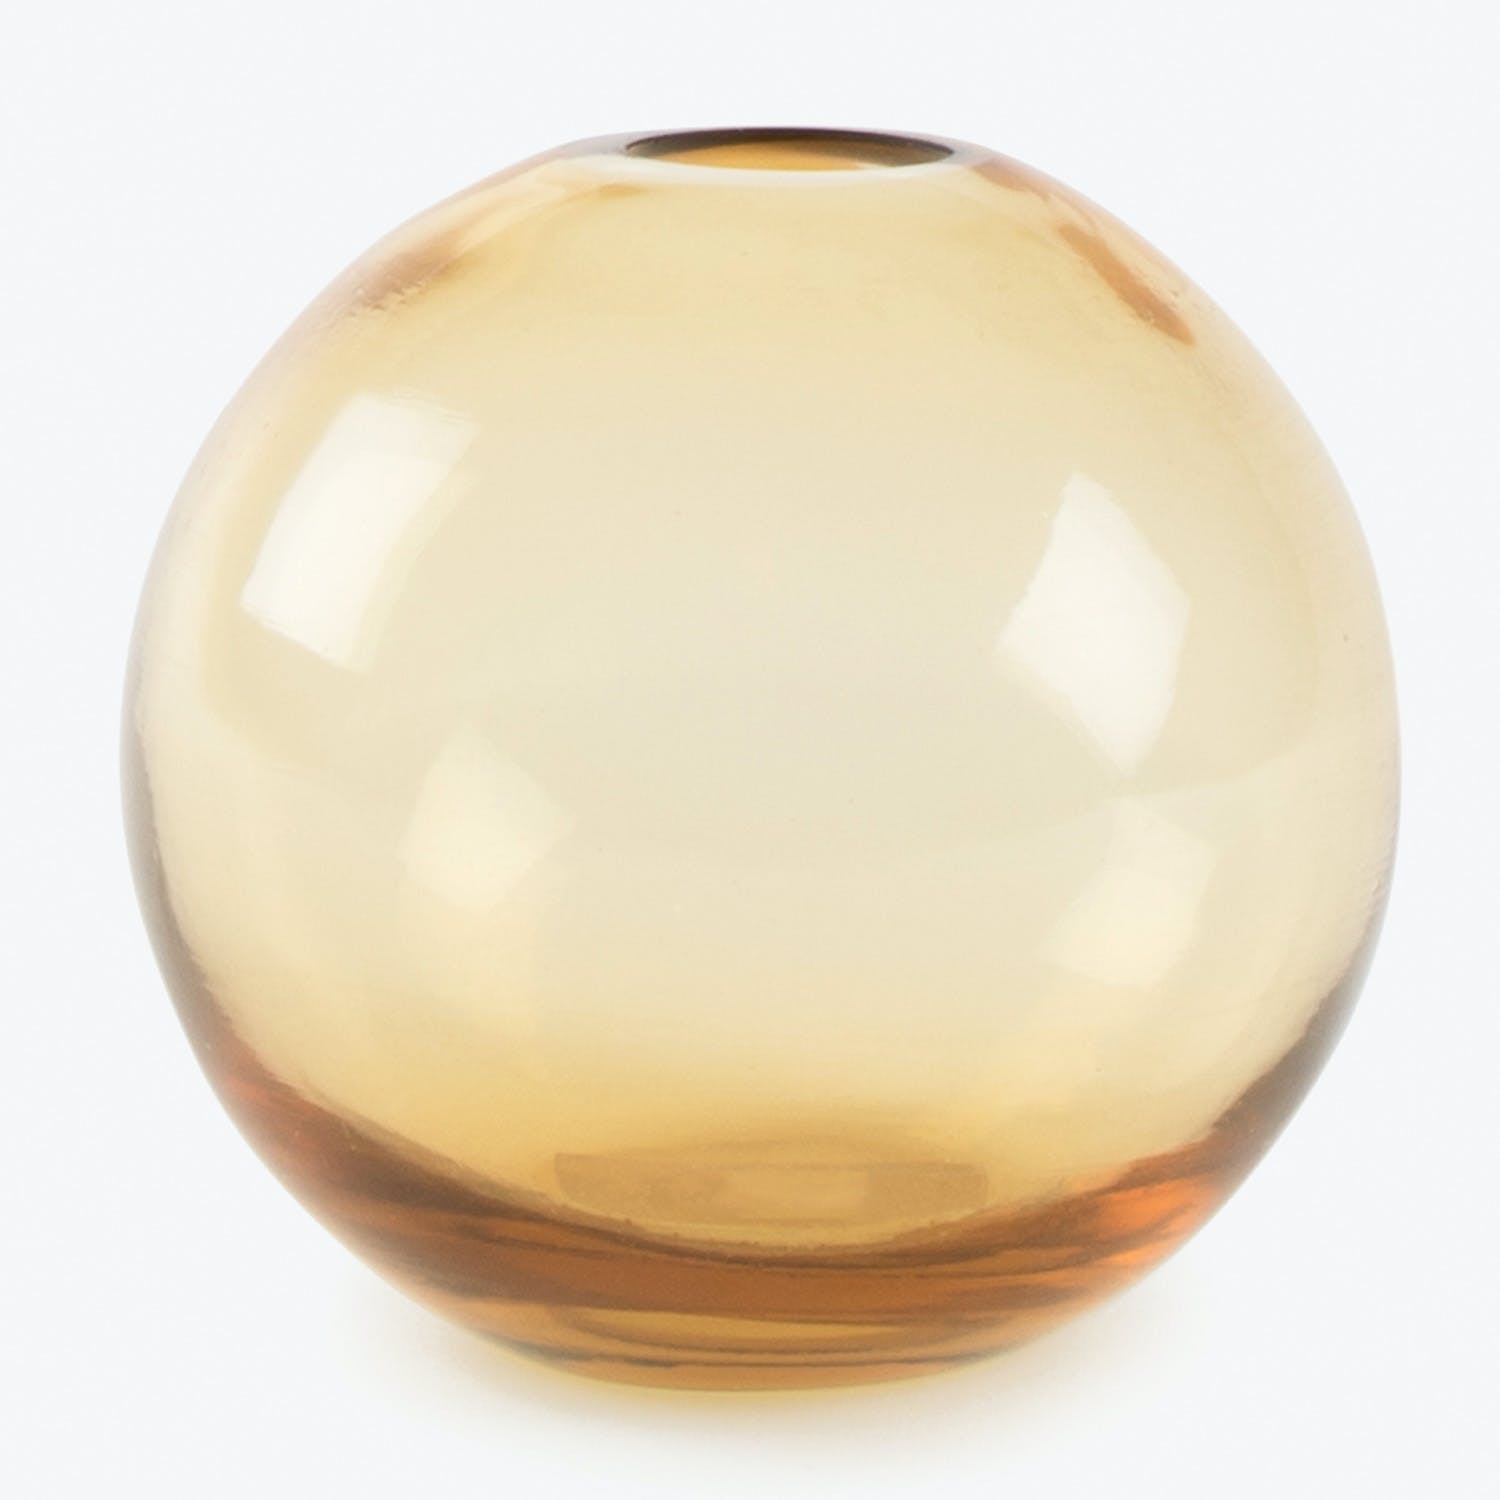 Translucent glass vase with amber tint and sleek design.